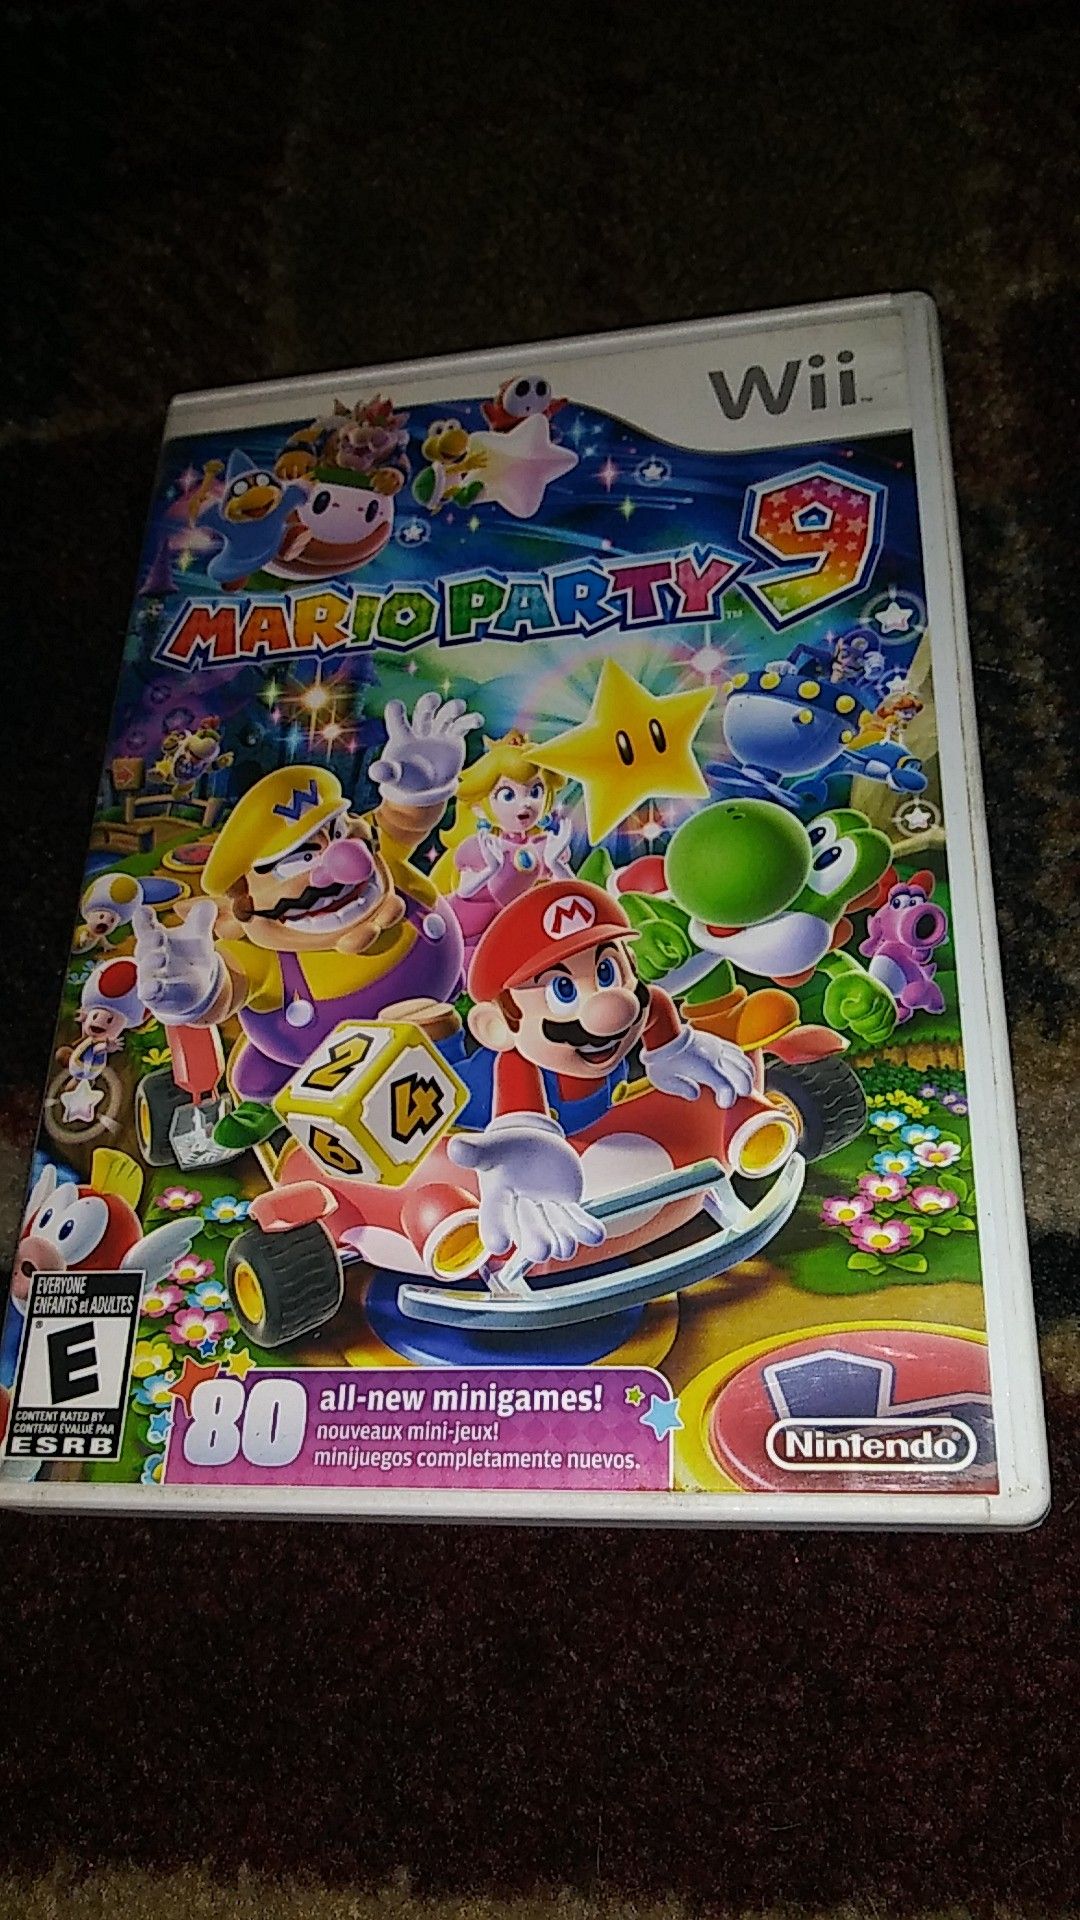 MARIO PARTY 9 - (USED) Nintendo Wii & Wii U video game